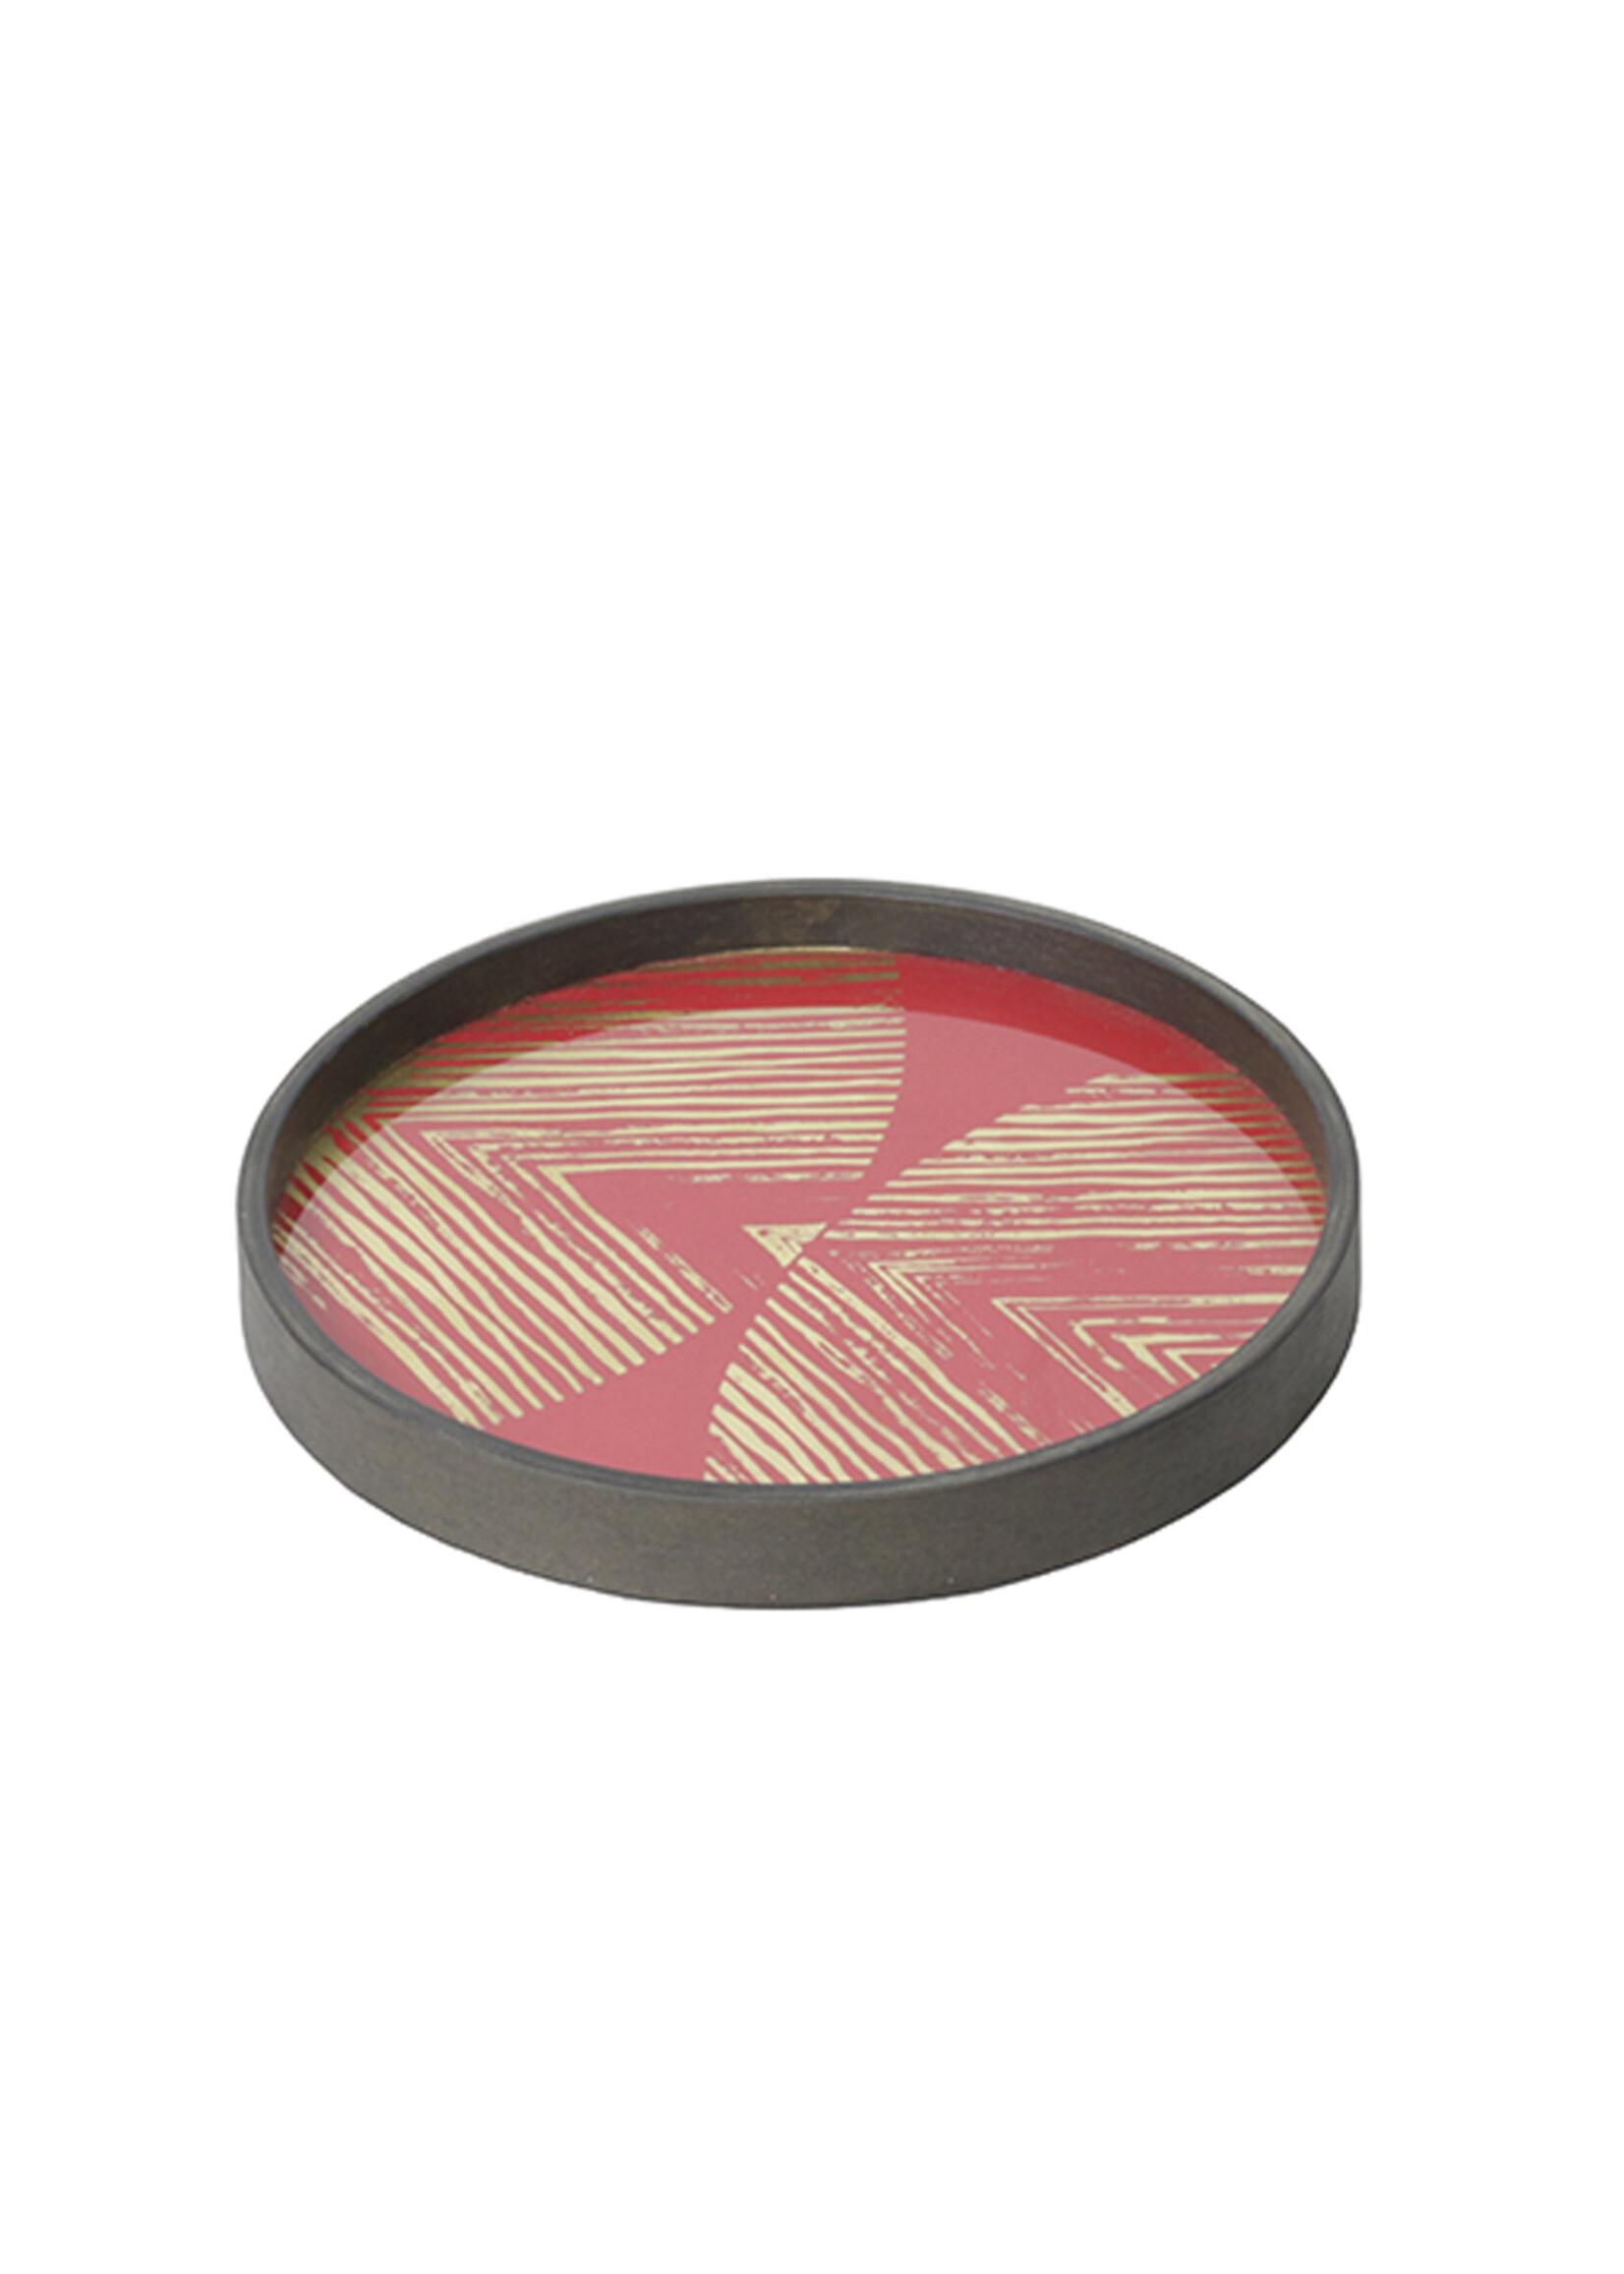 Notre Monde Mini tray "Gold linear circles" in rood en goud